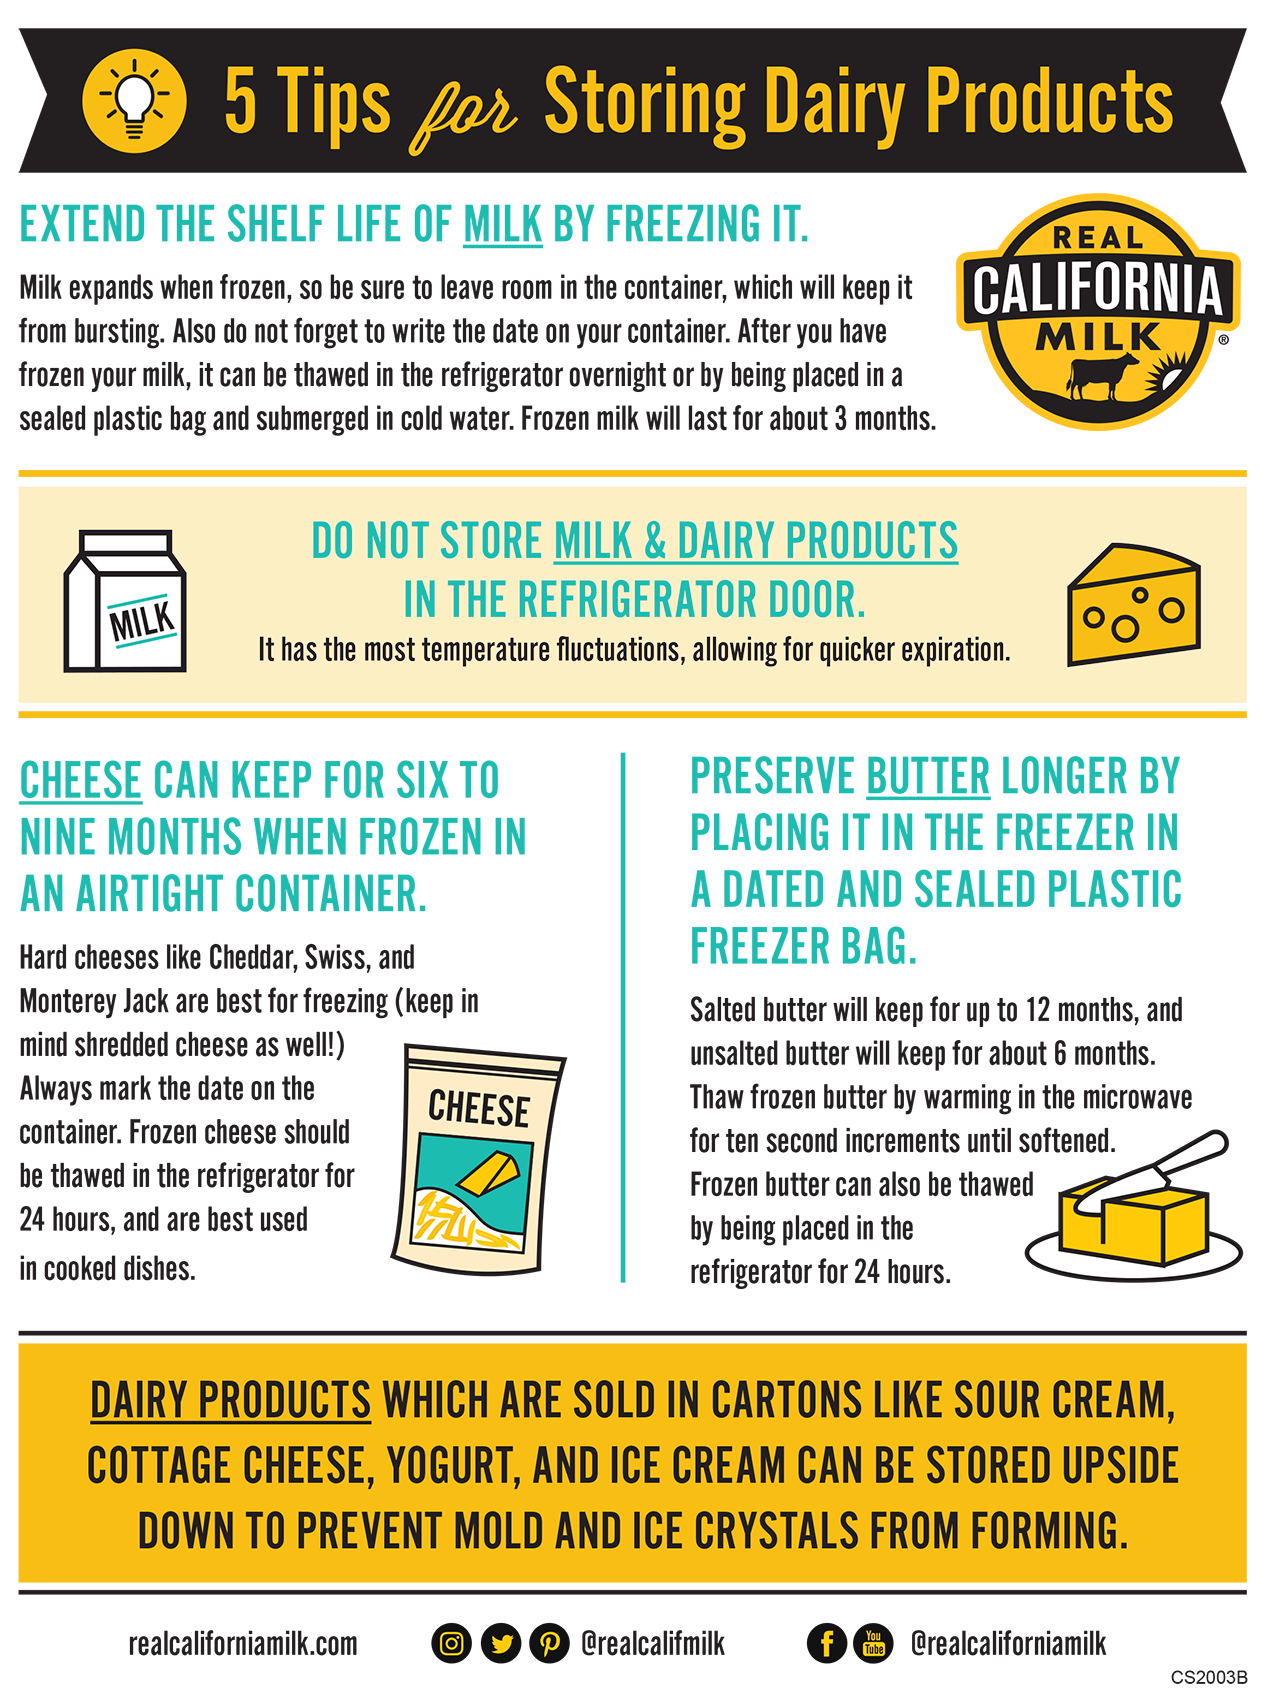 5 Tips for Storing Dairy Products Infographic